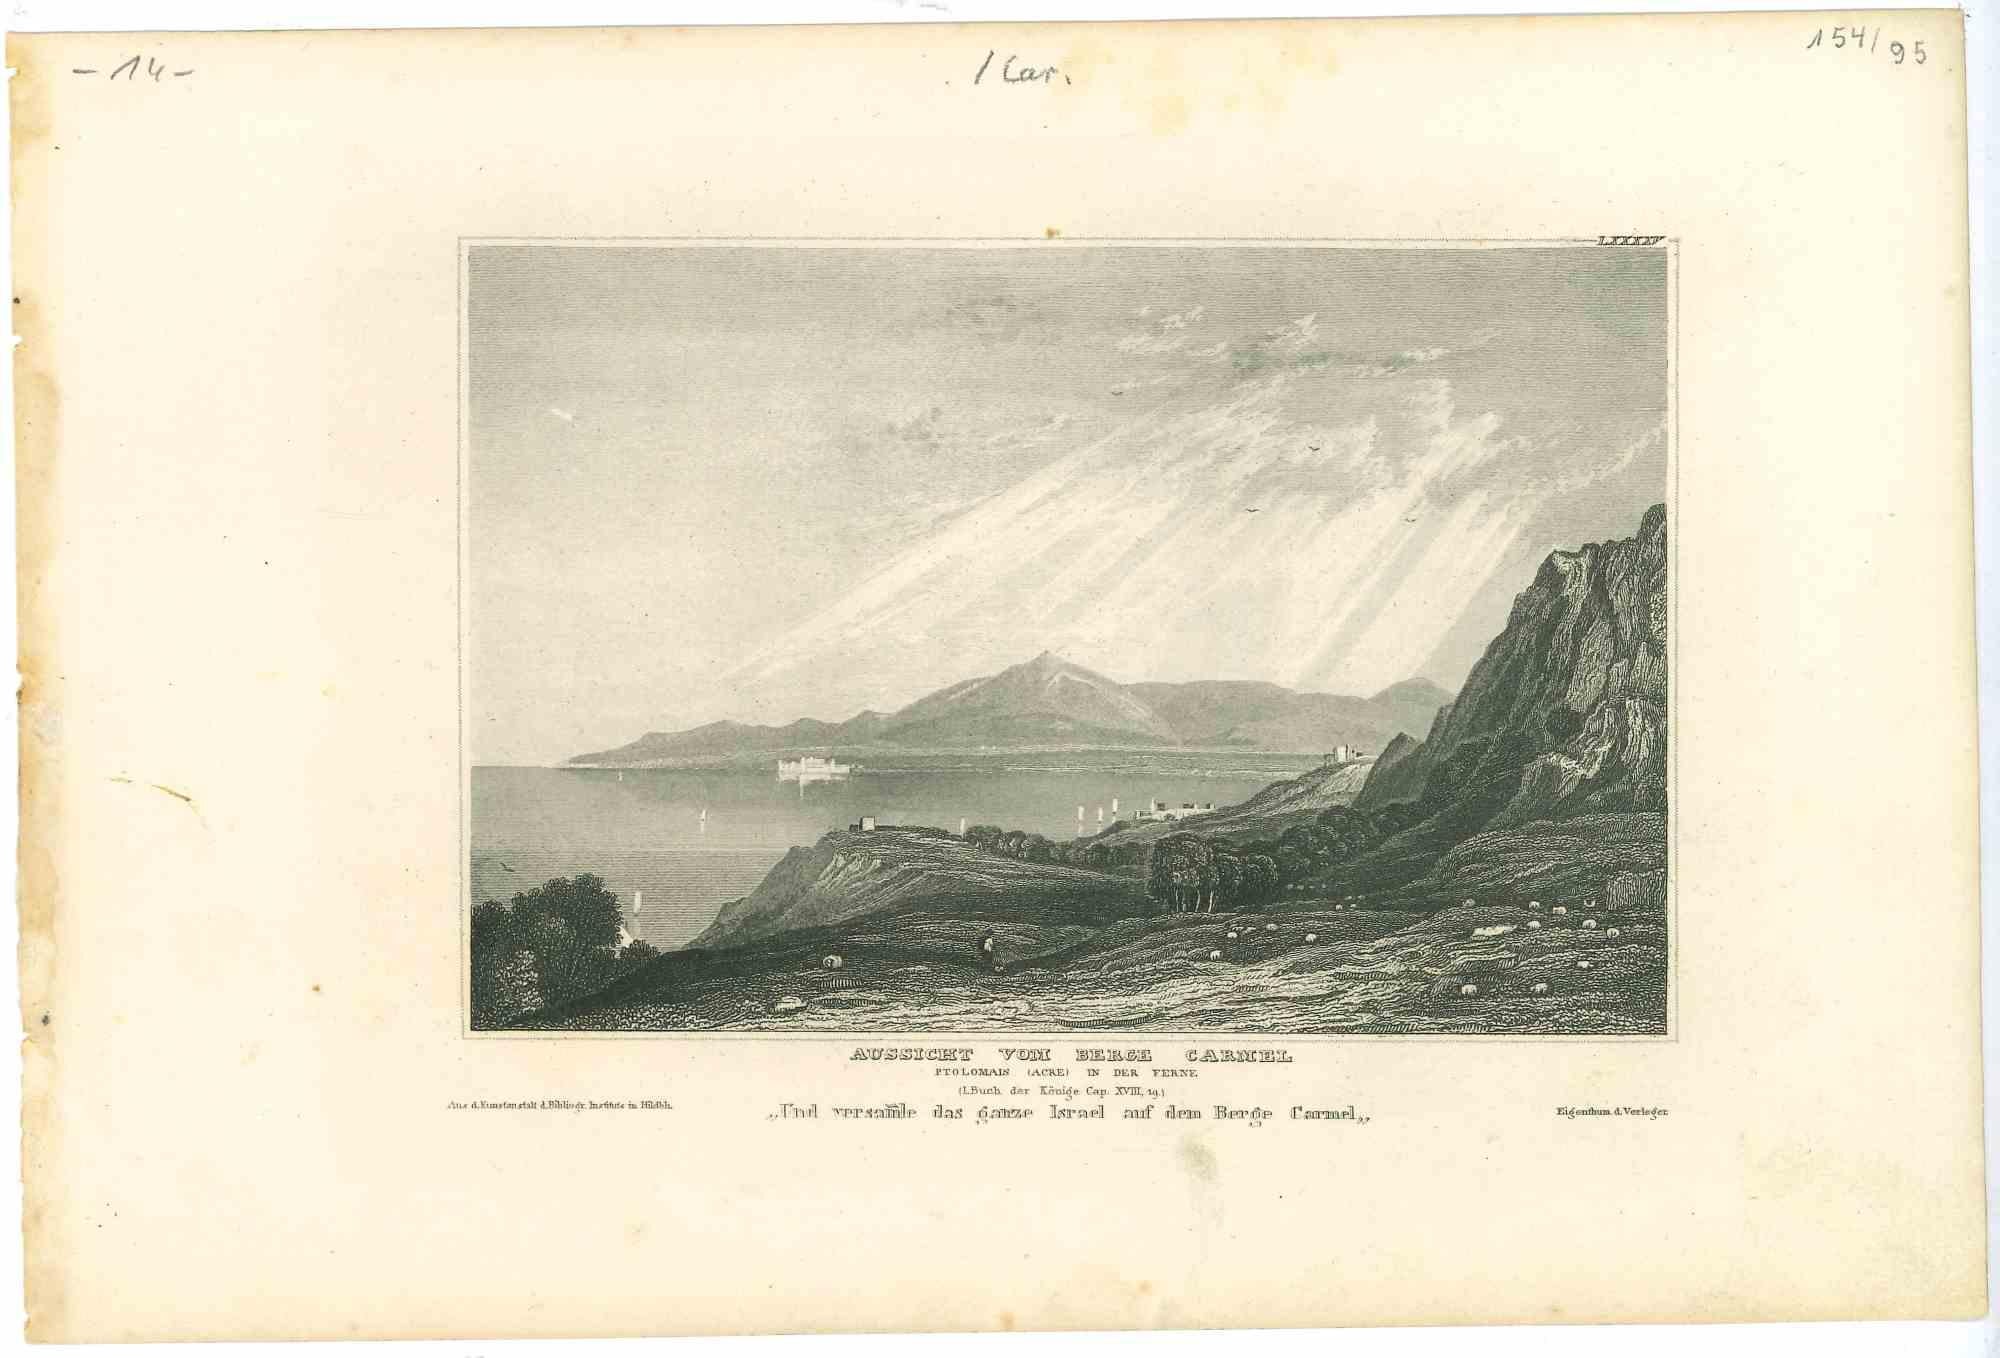 Unknown Figurative Print - Ancient View from the Karmel Mountains - Original Lithograph - Mid-19th Century